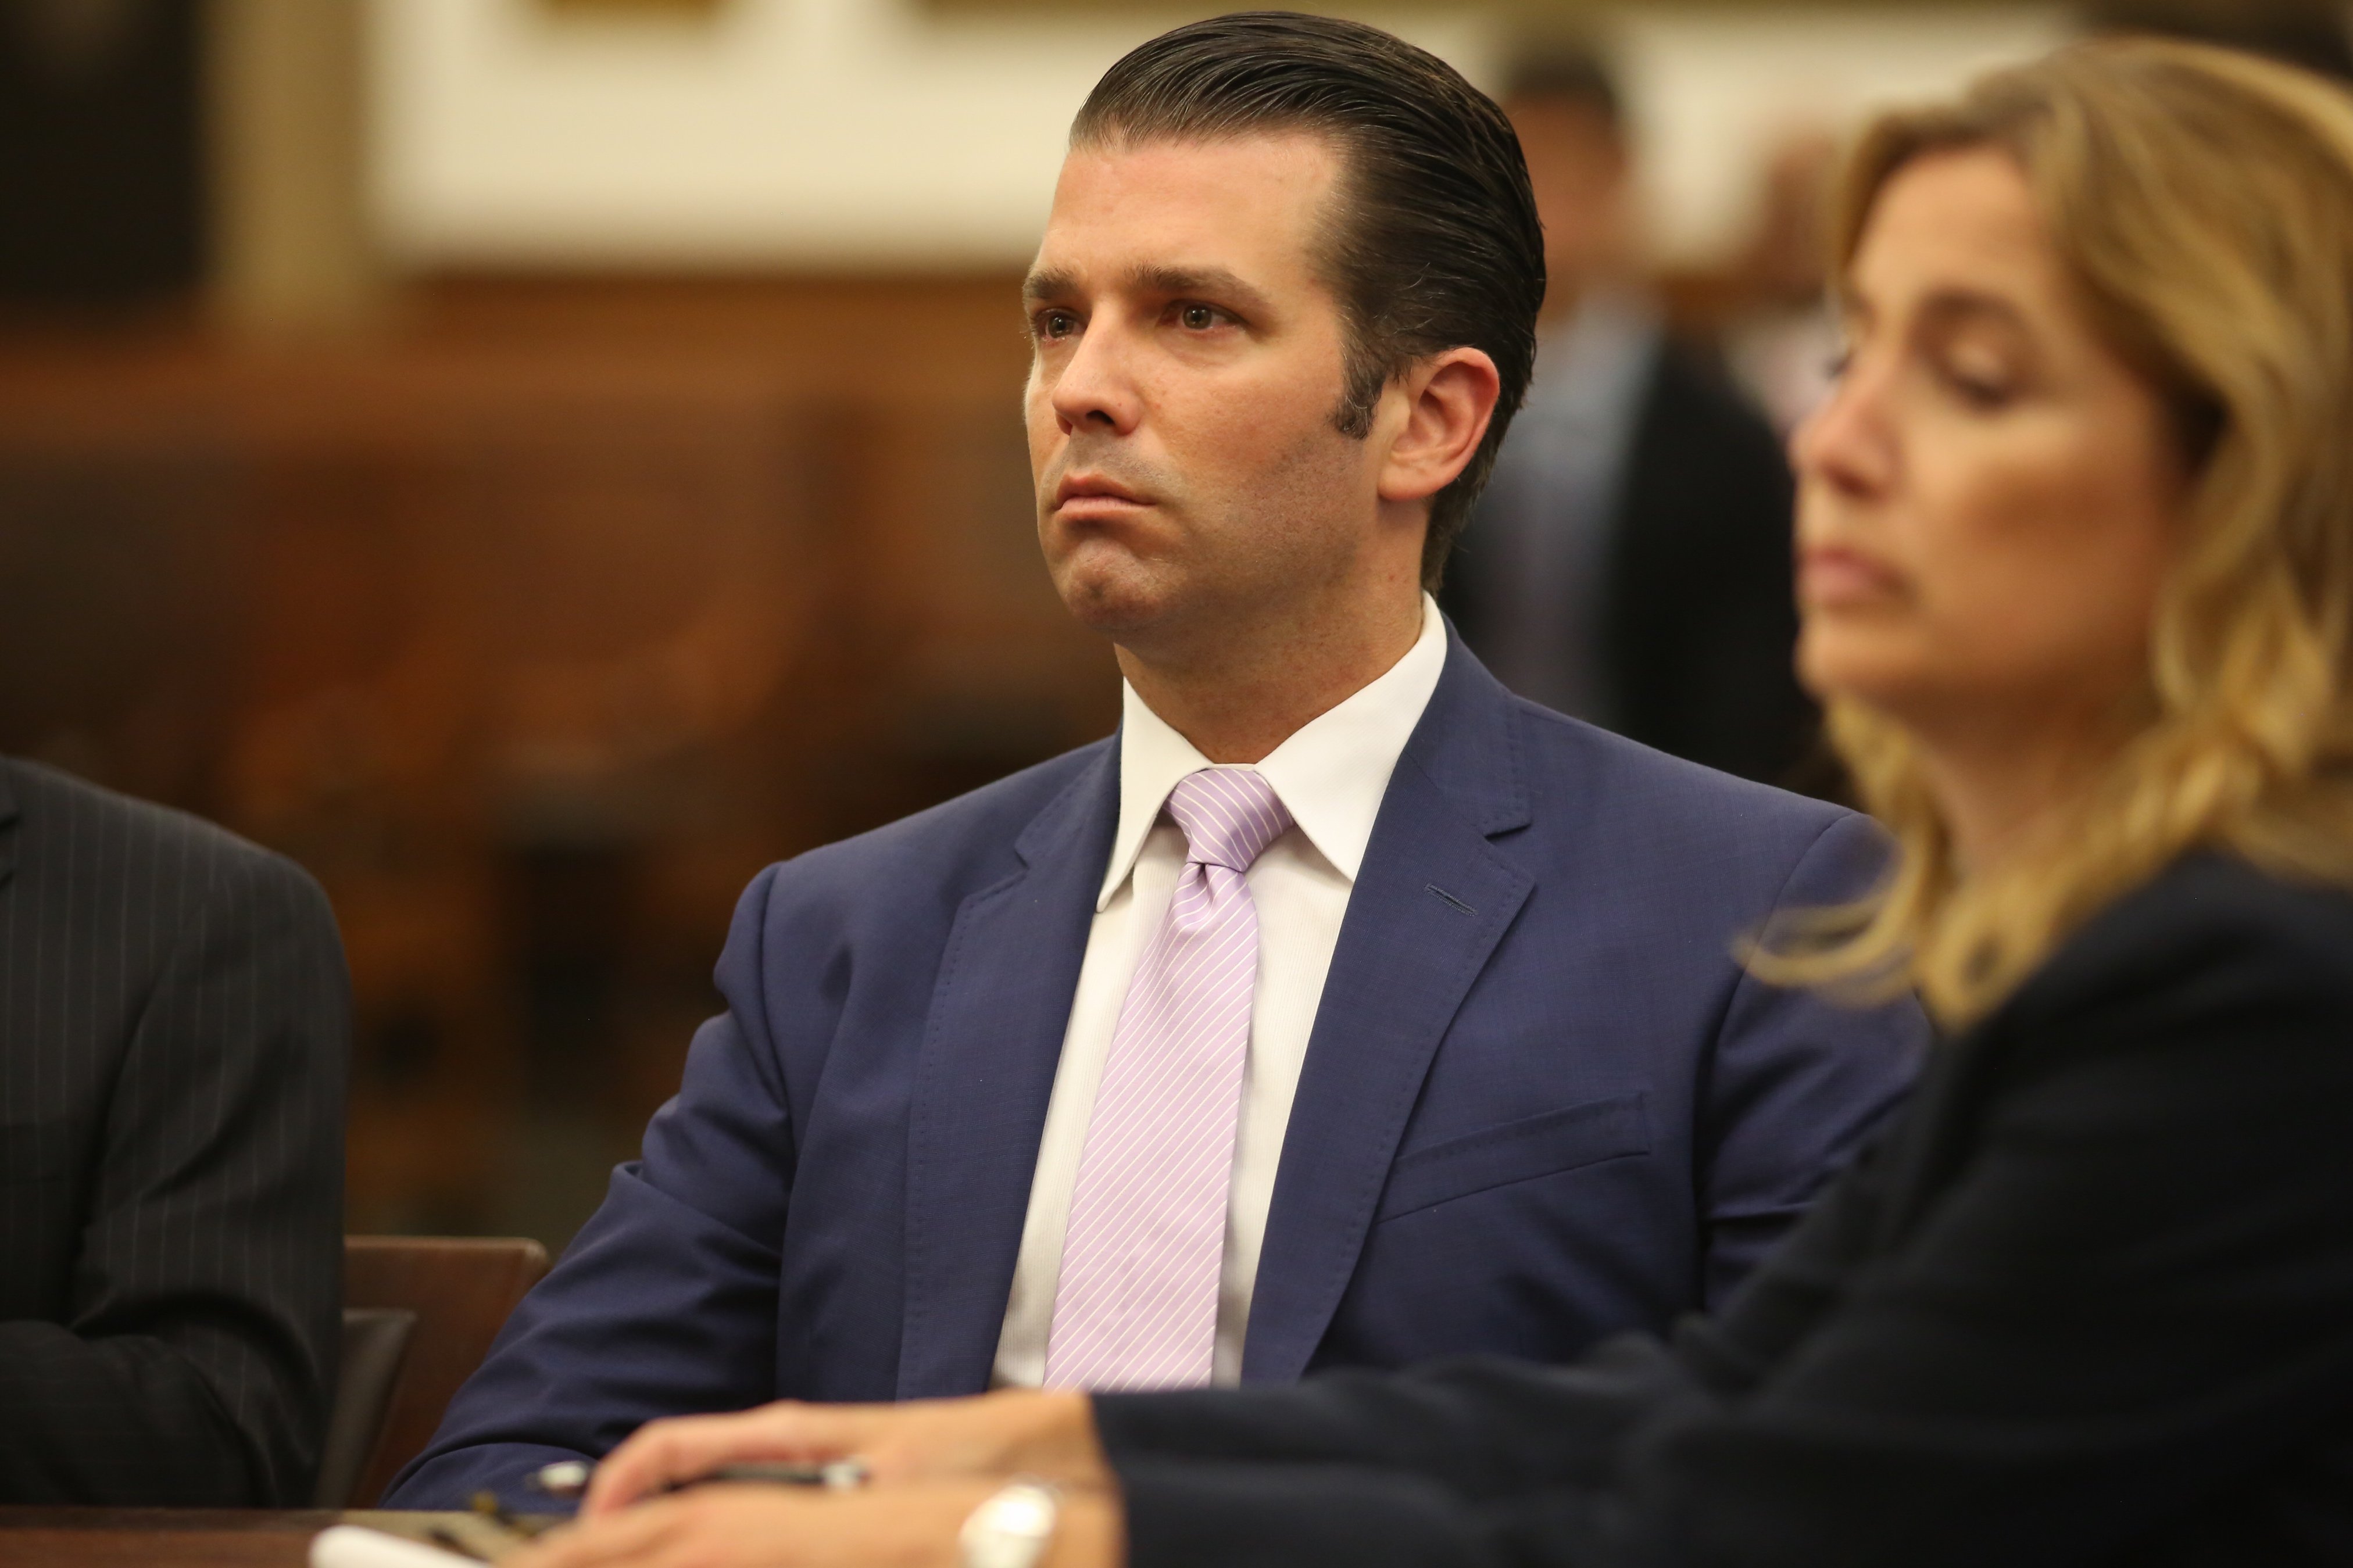 Donald Trump Jr and his ex-wife Vanessa Trump appear in the Civil Supreme Court on July 26, 2018